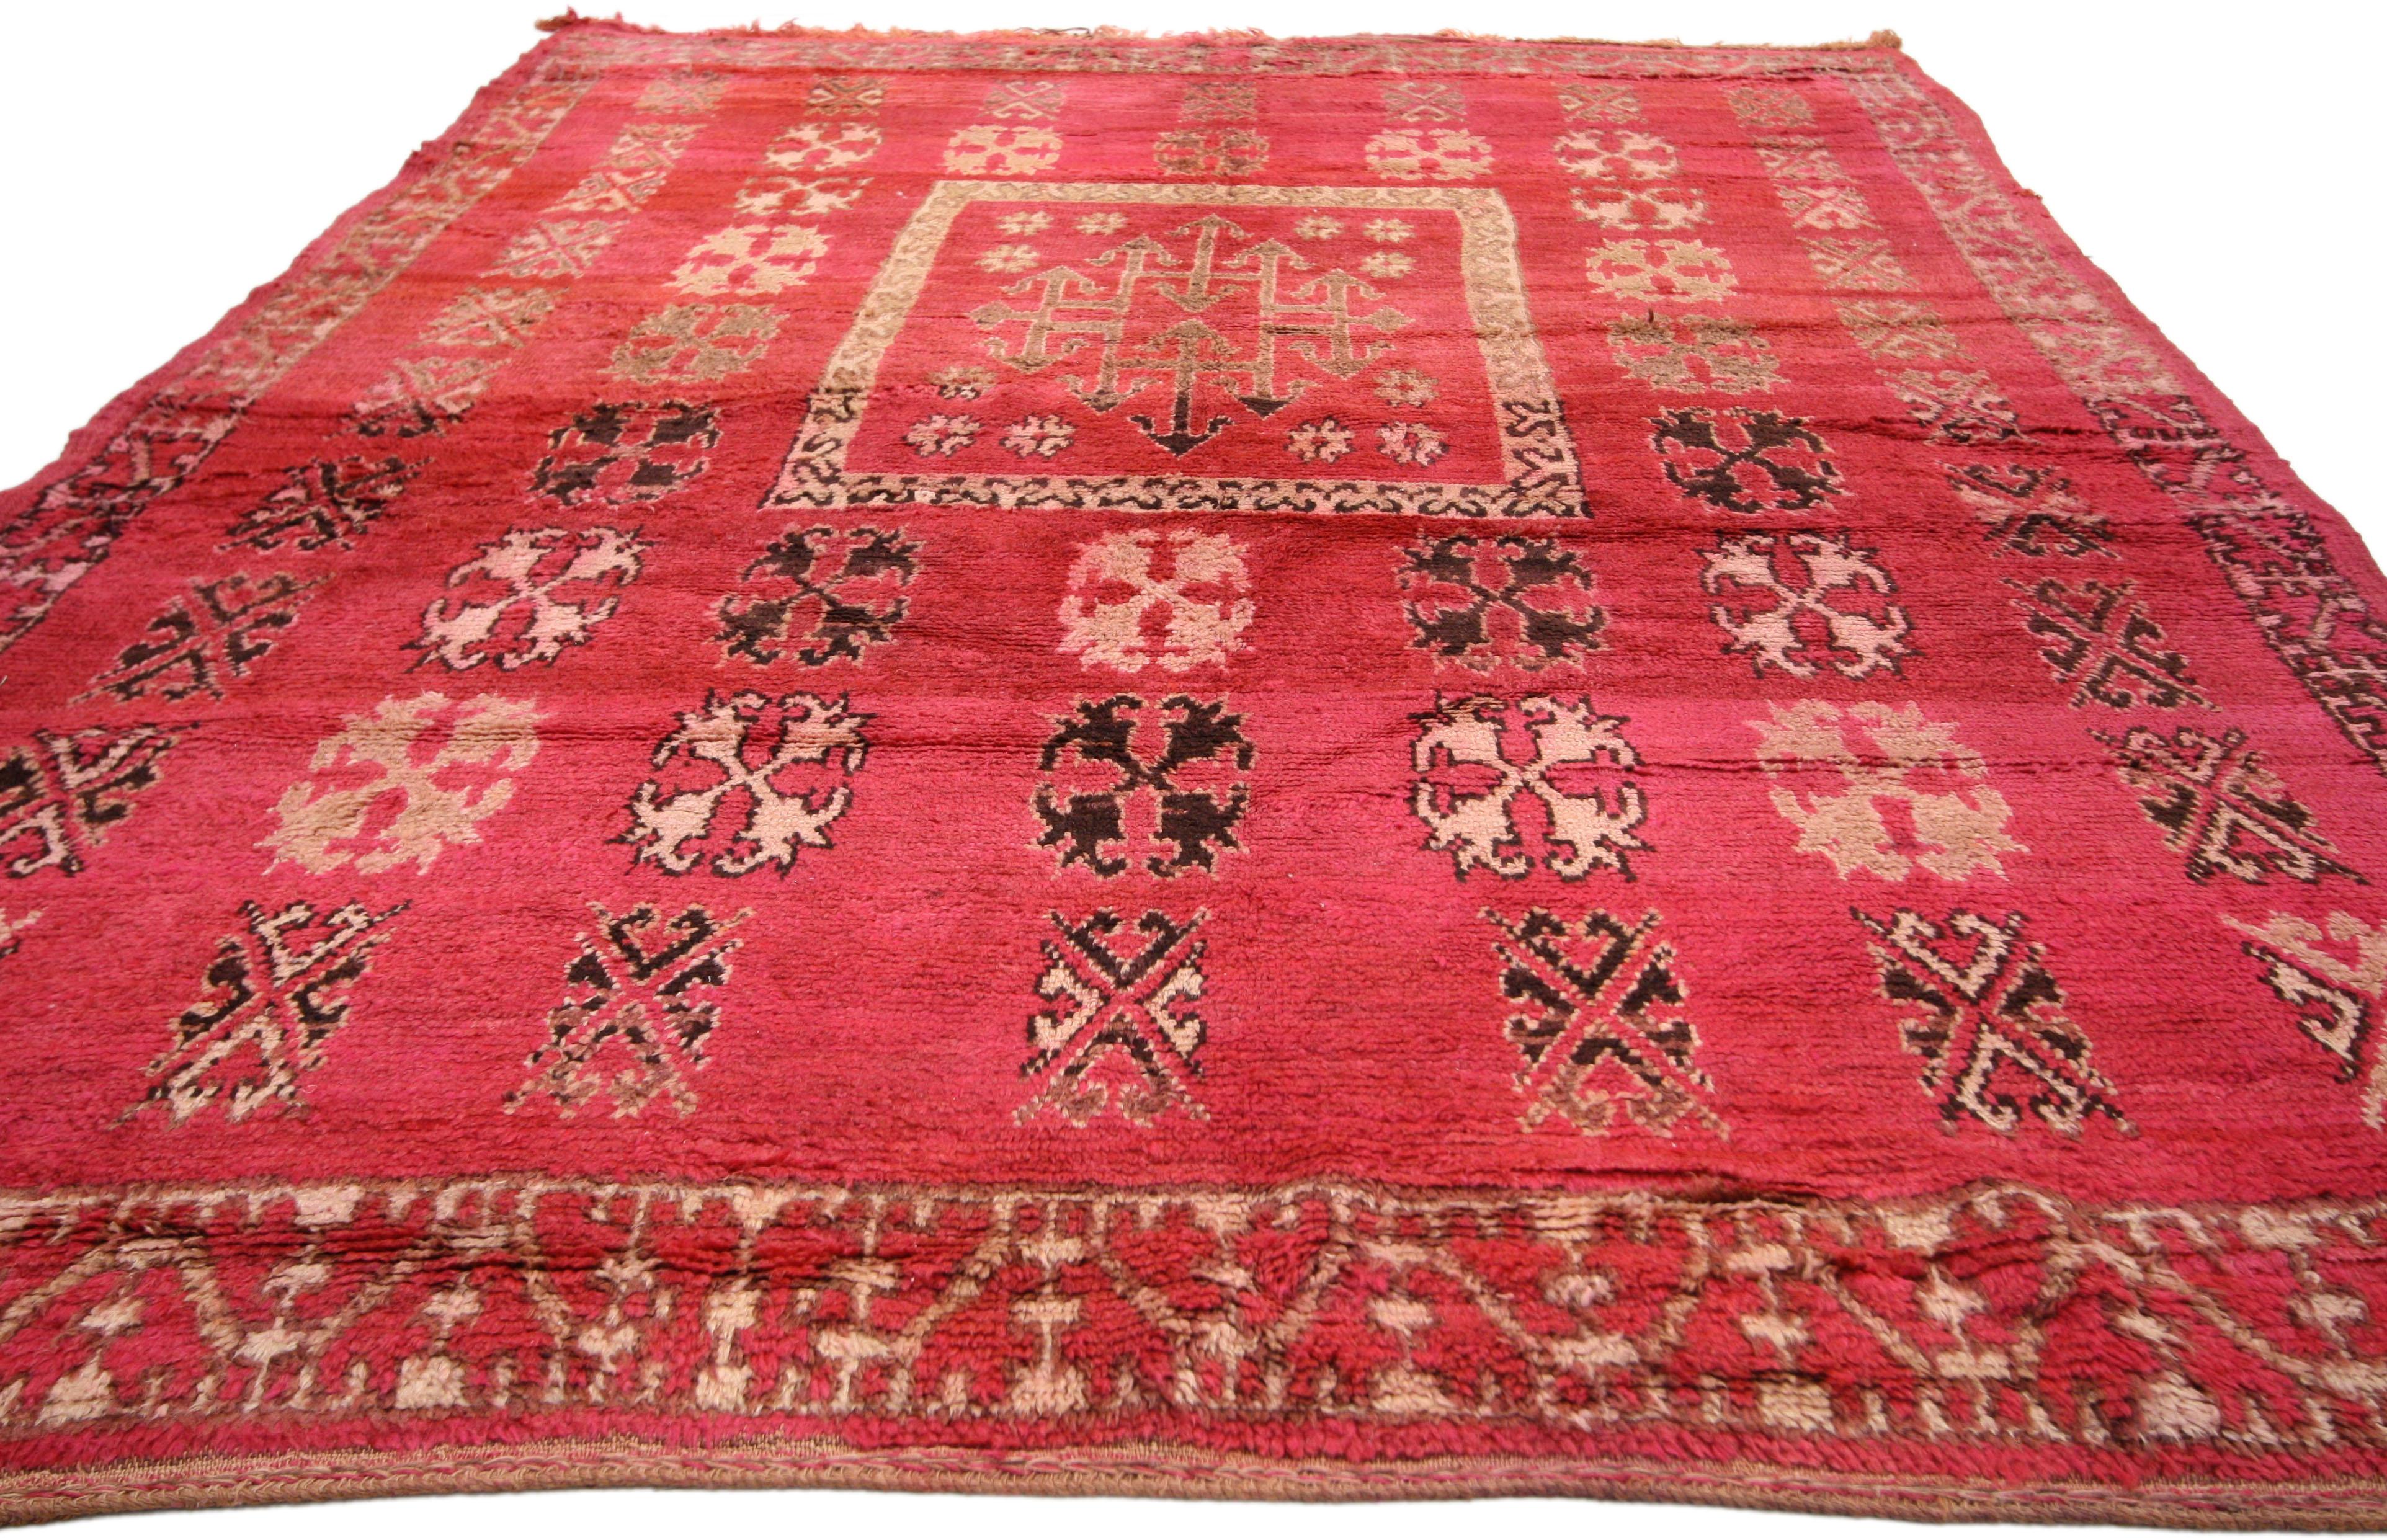 Hand-Knotted Vintage Berber Moroccan Rug with Tribal Style, Moroccan Berber Carpet